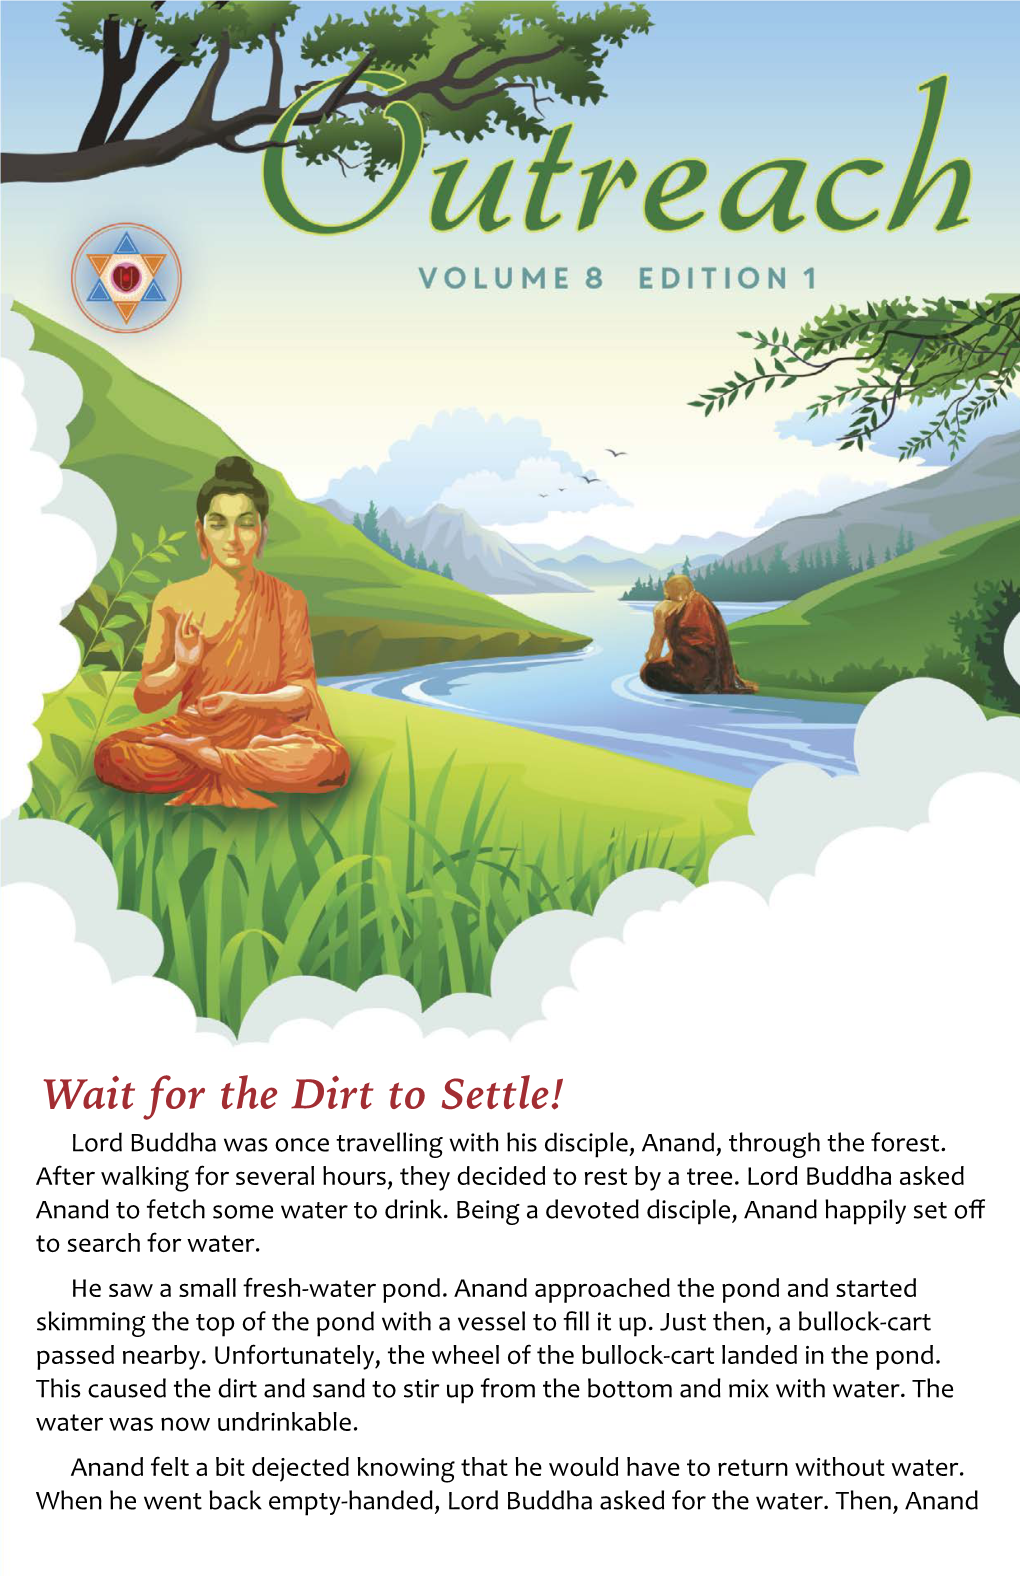 Wait for the Dirt to Settle! Lord Buddha Was Once Travelling with His Disciple, Anand, Through the Forest